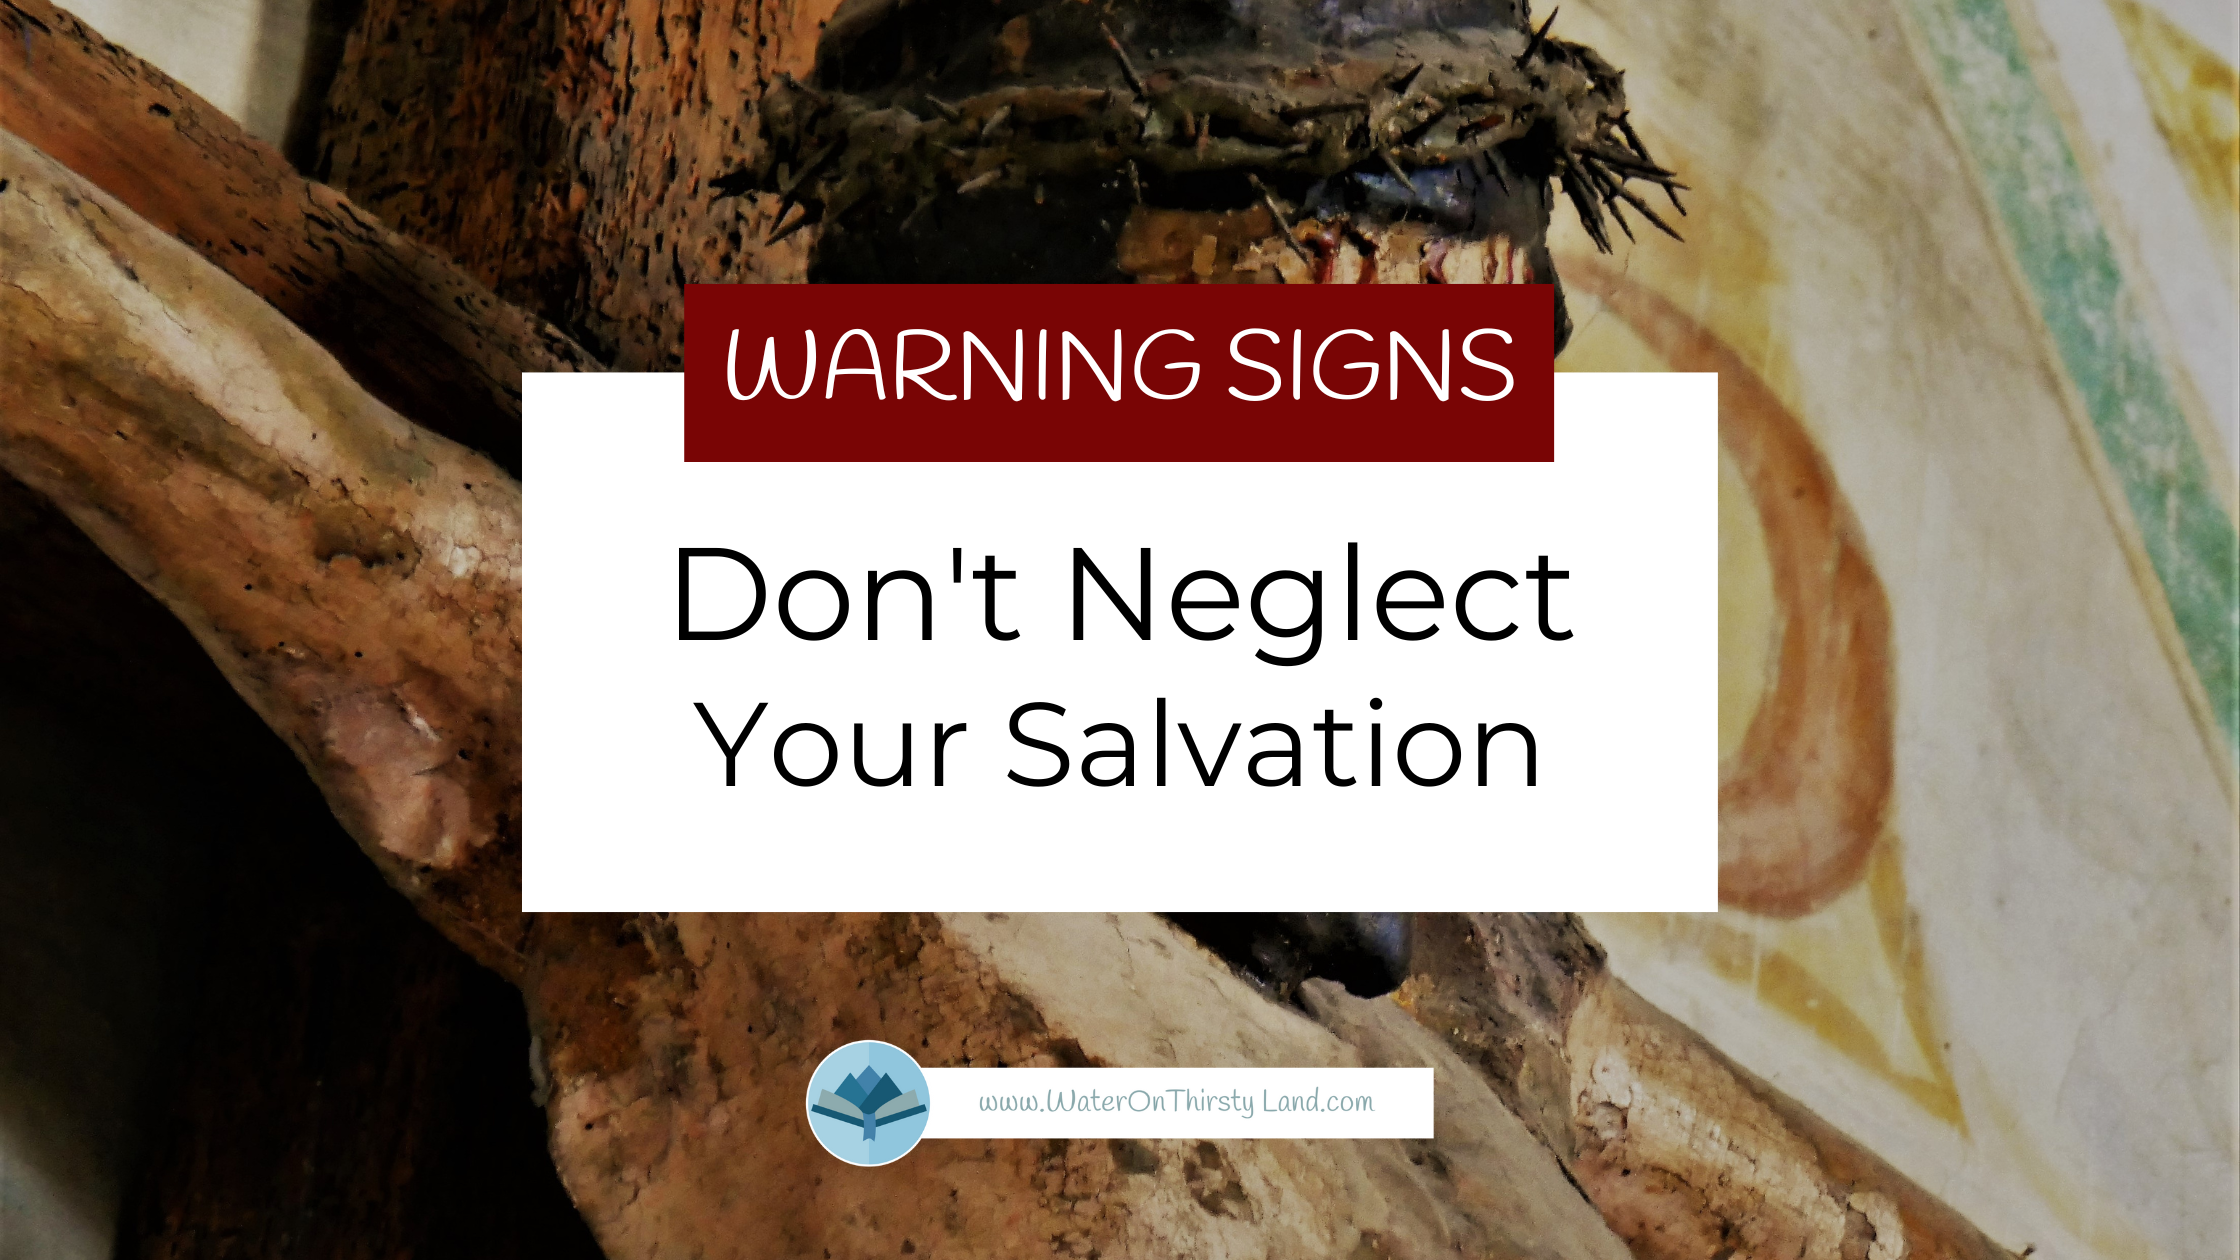 Don't Neglect Your Salvation